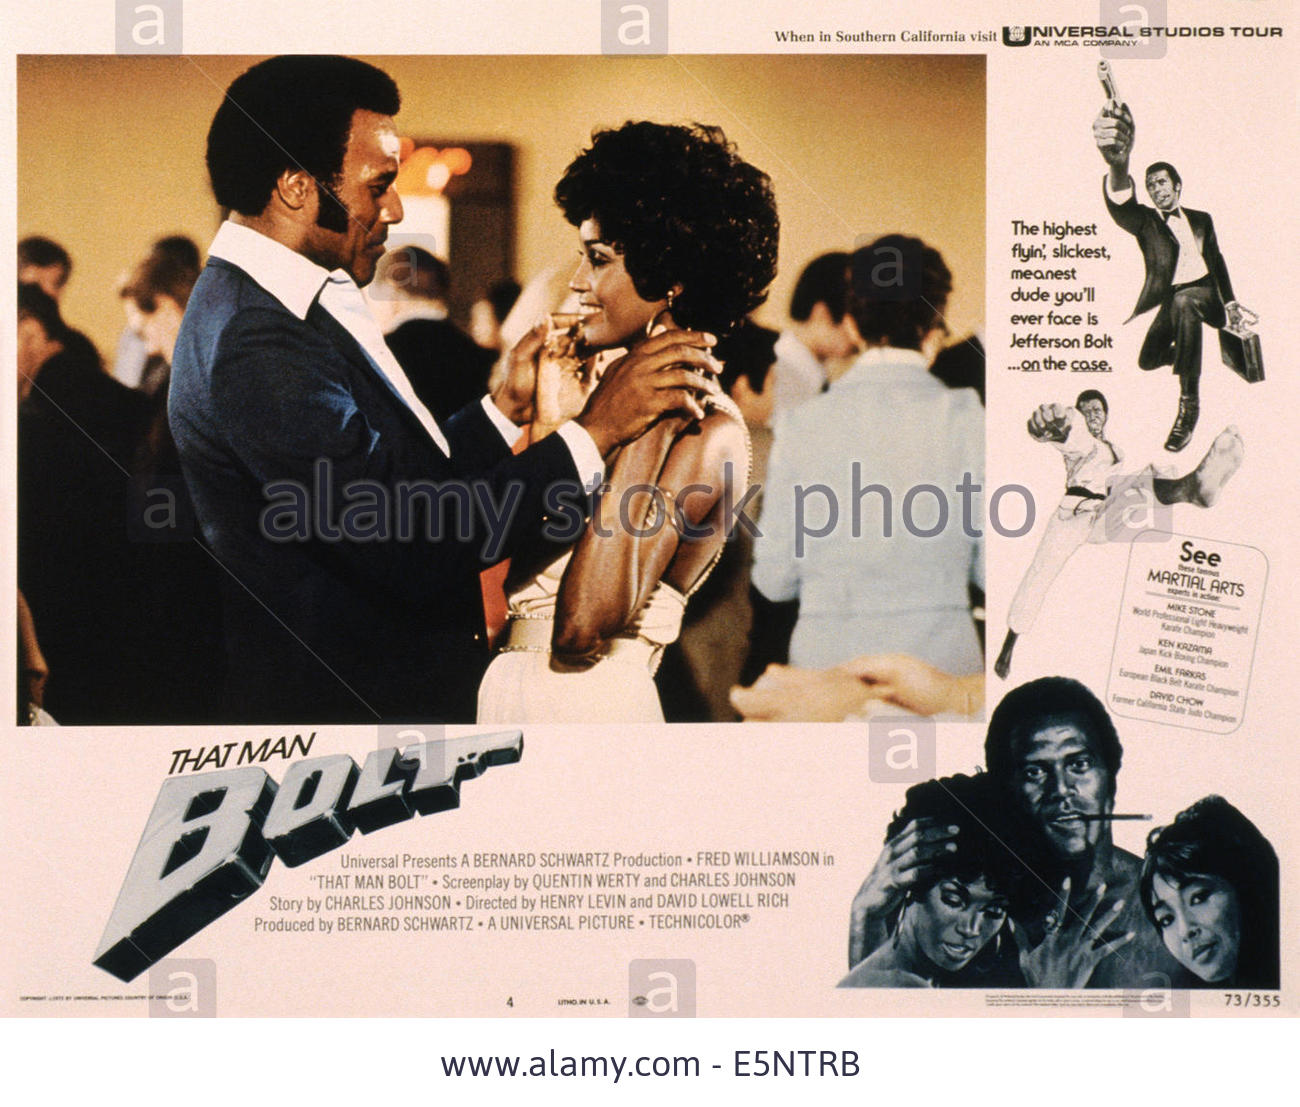 pictures-of-teresa-graves